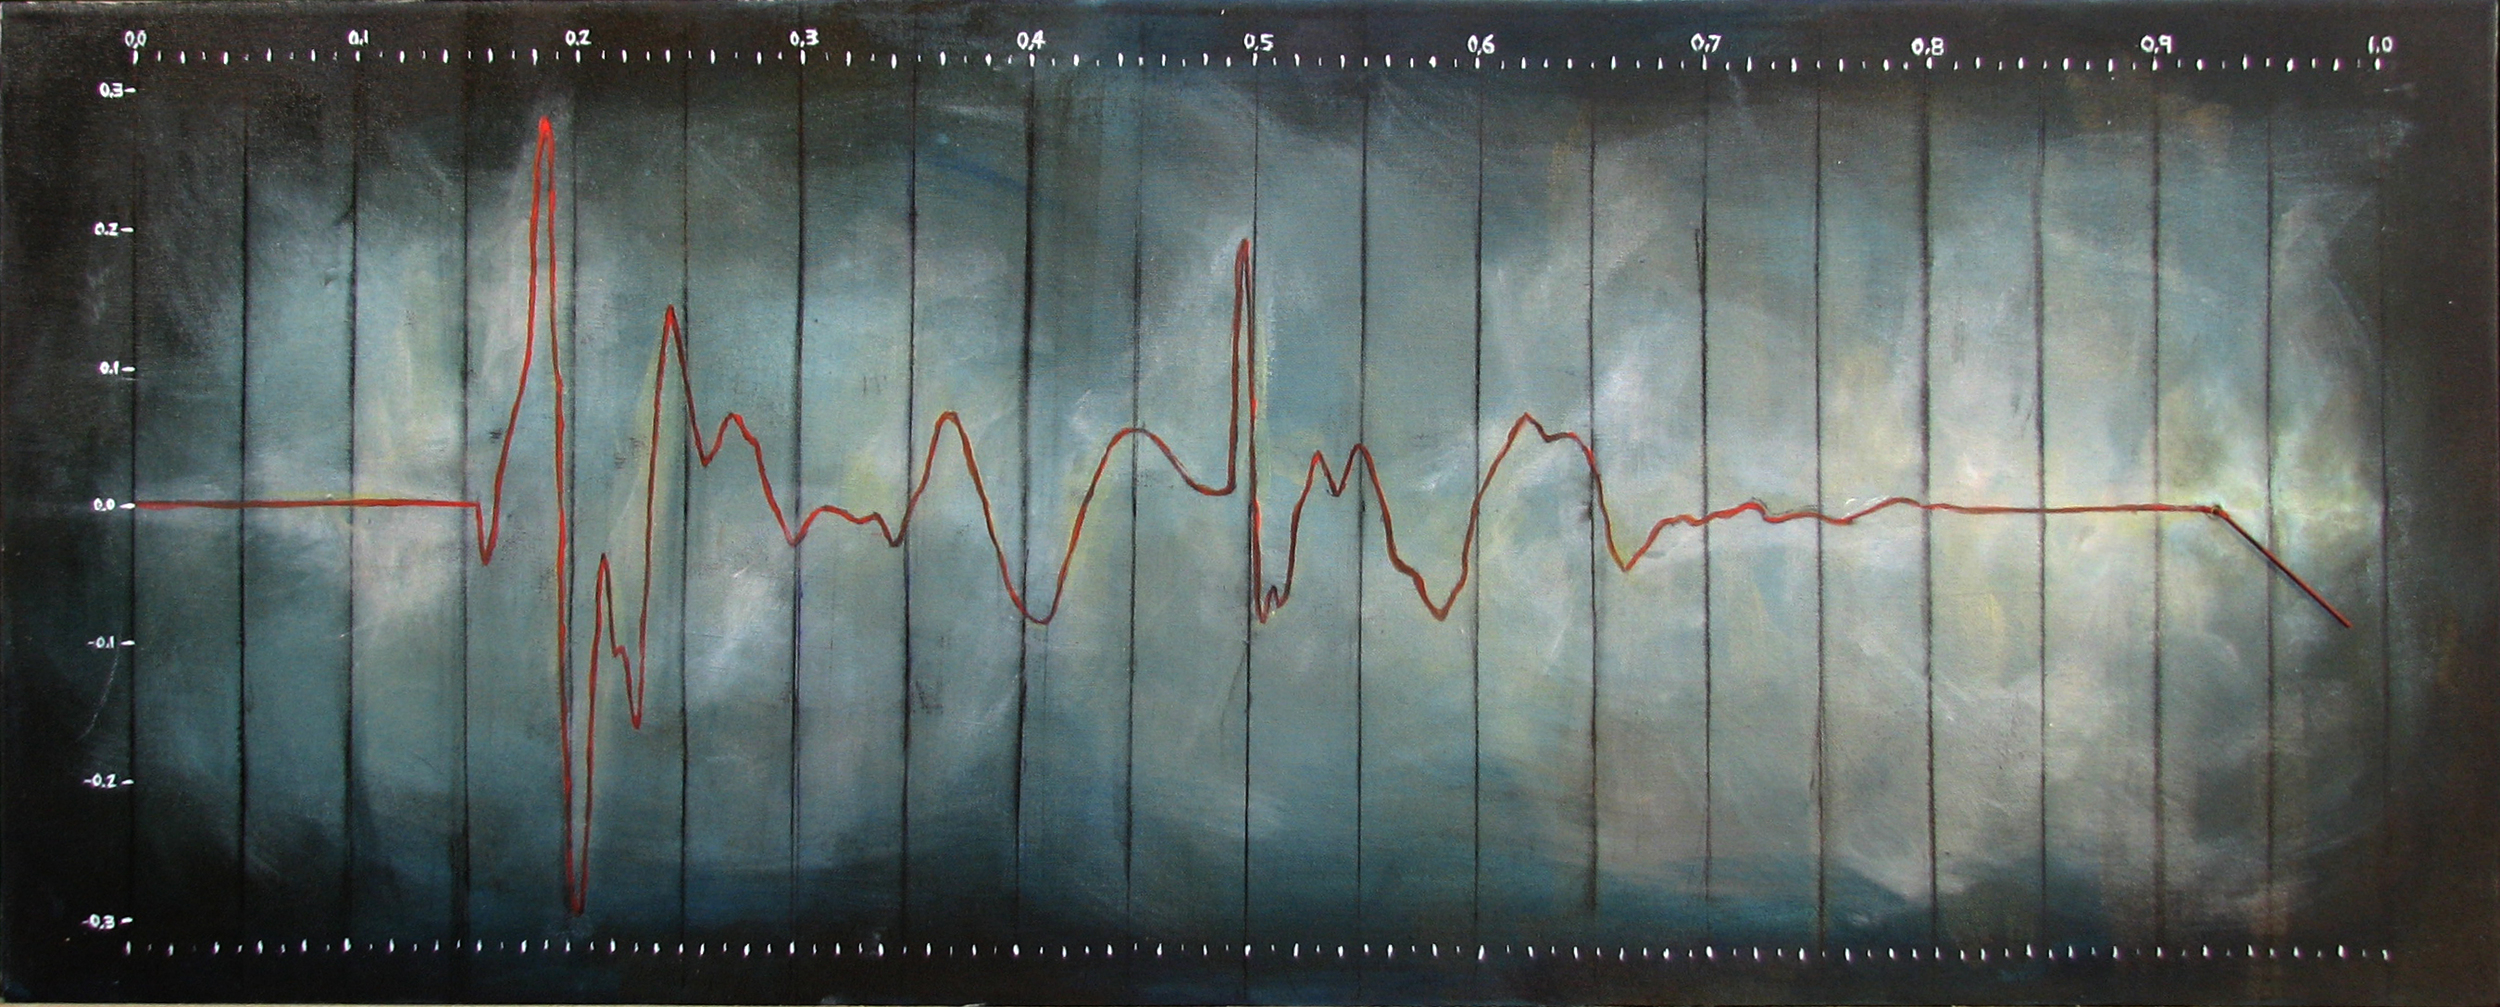  "One Heartbeat, One Second"  clock, speakers, acrylic on canvas  18" x 40"  2010 